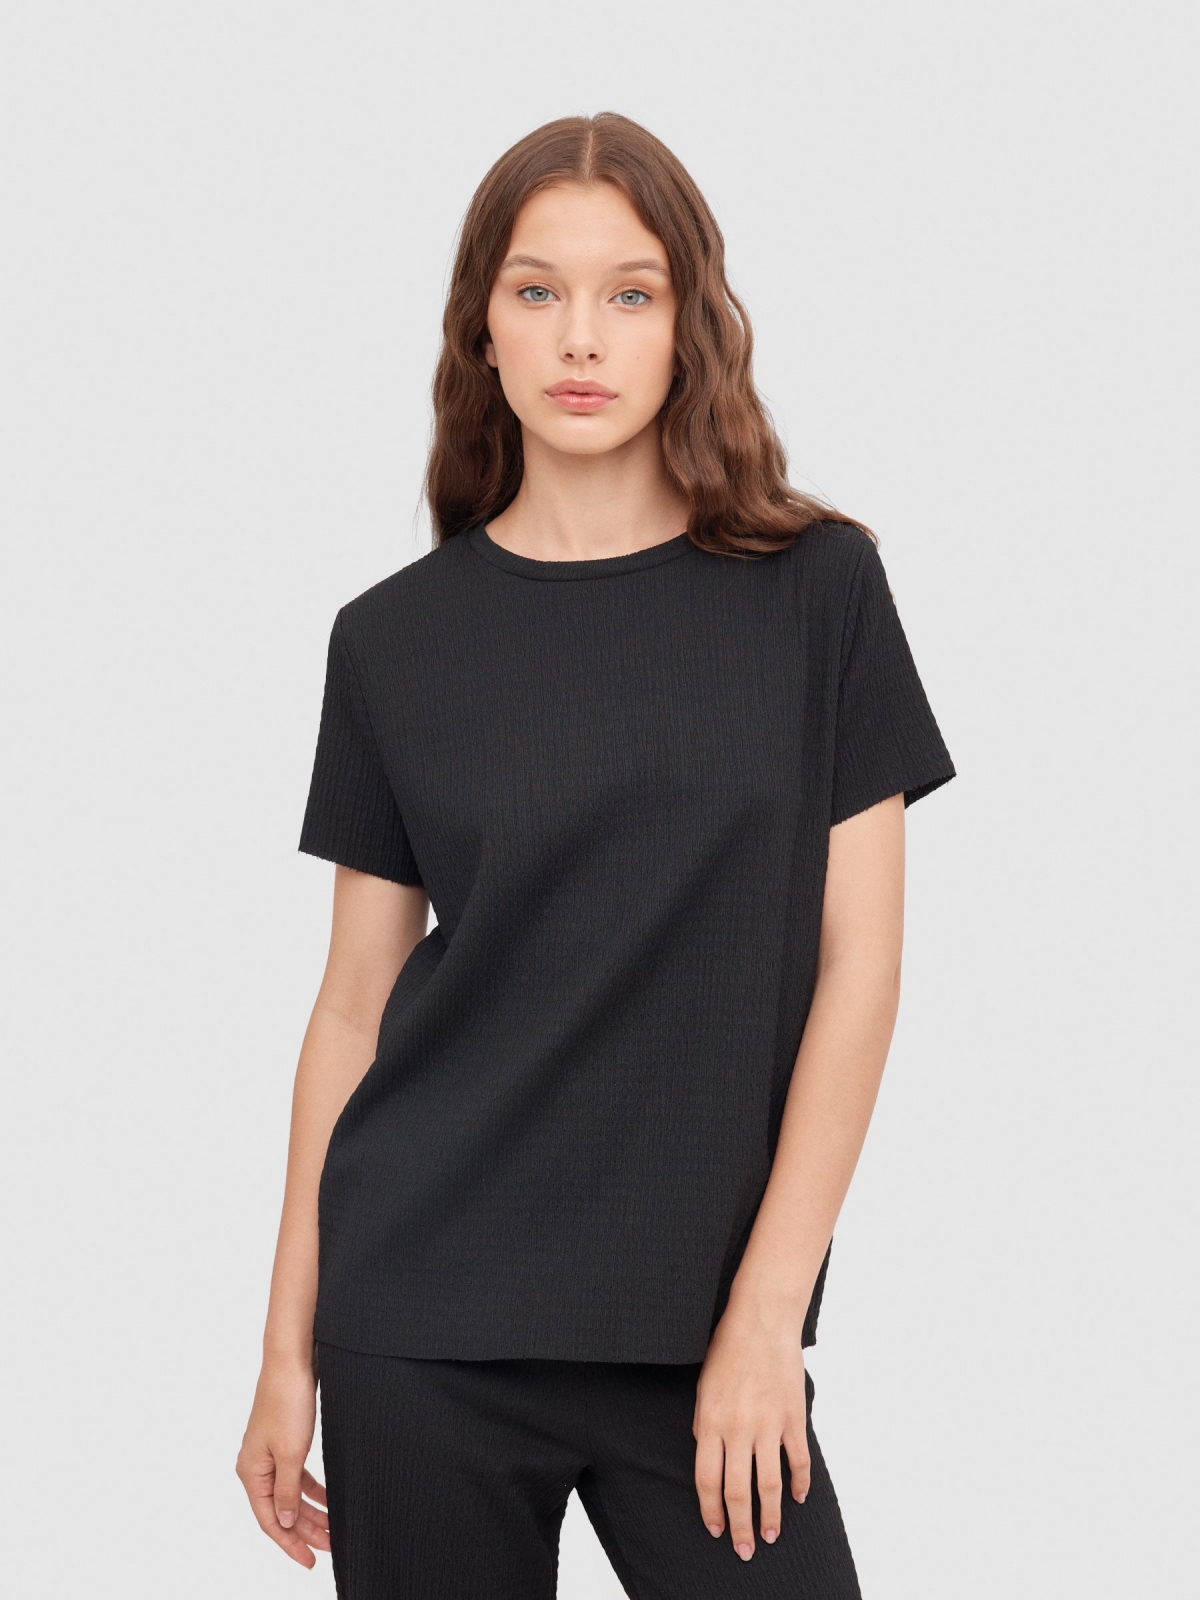 Fluid textured T-shirt black middle front view